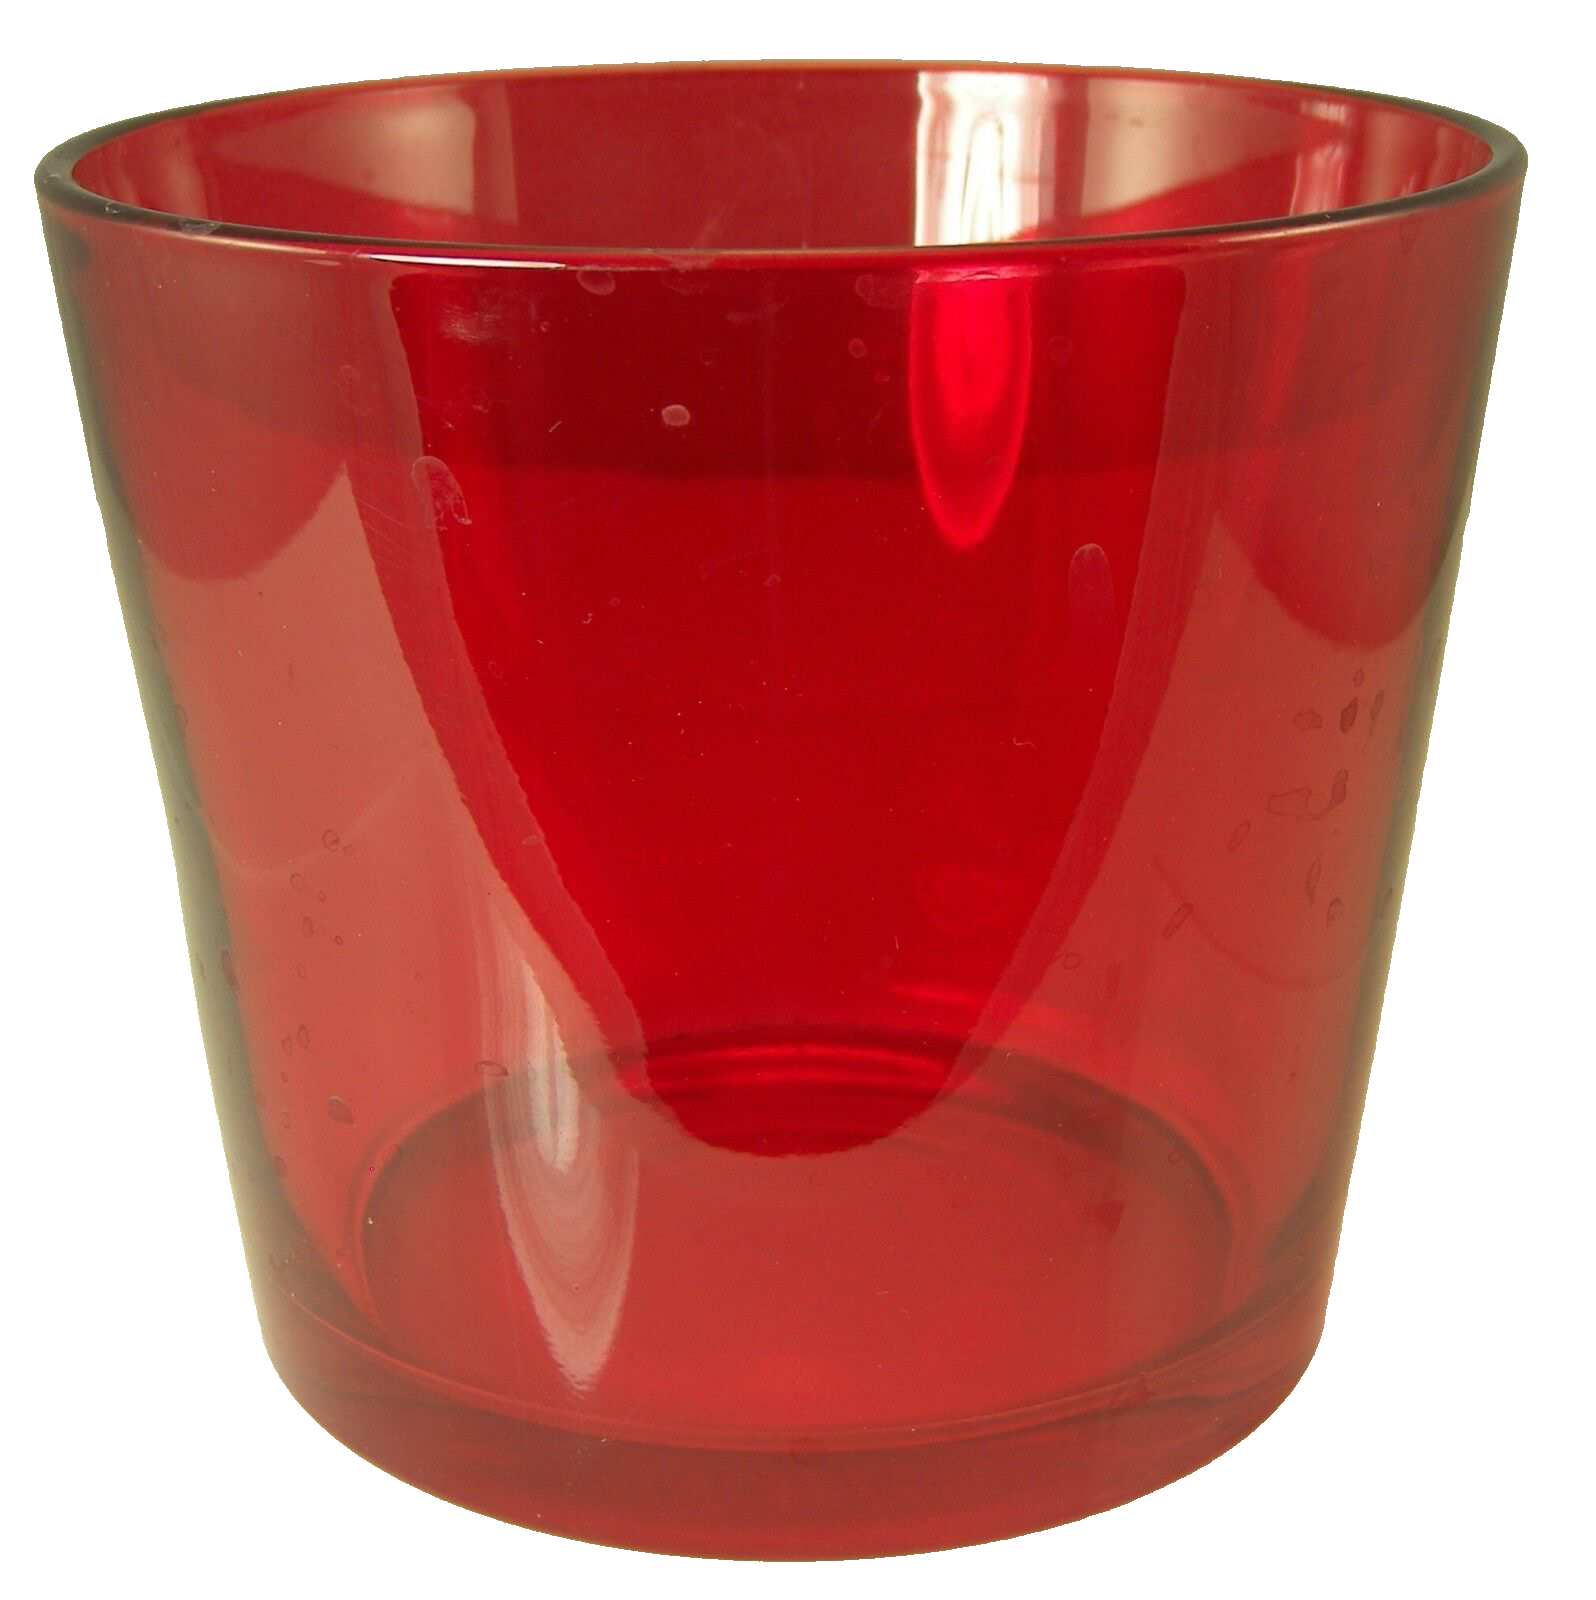 Primary image for Red Glass Ikea Bowl Christmas or Valentine's Day Decor 4.75" tall x 5.5"